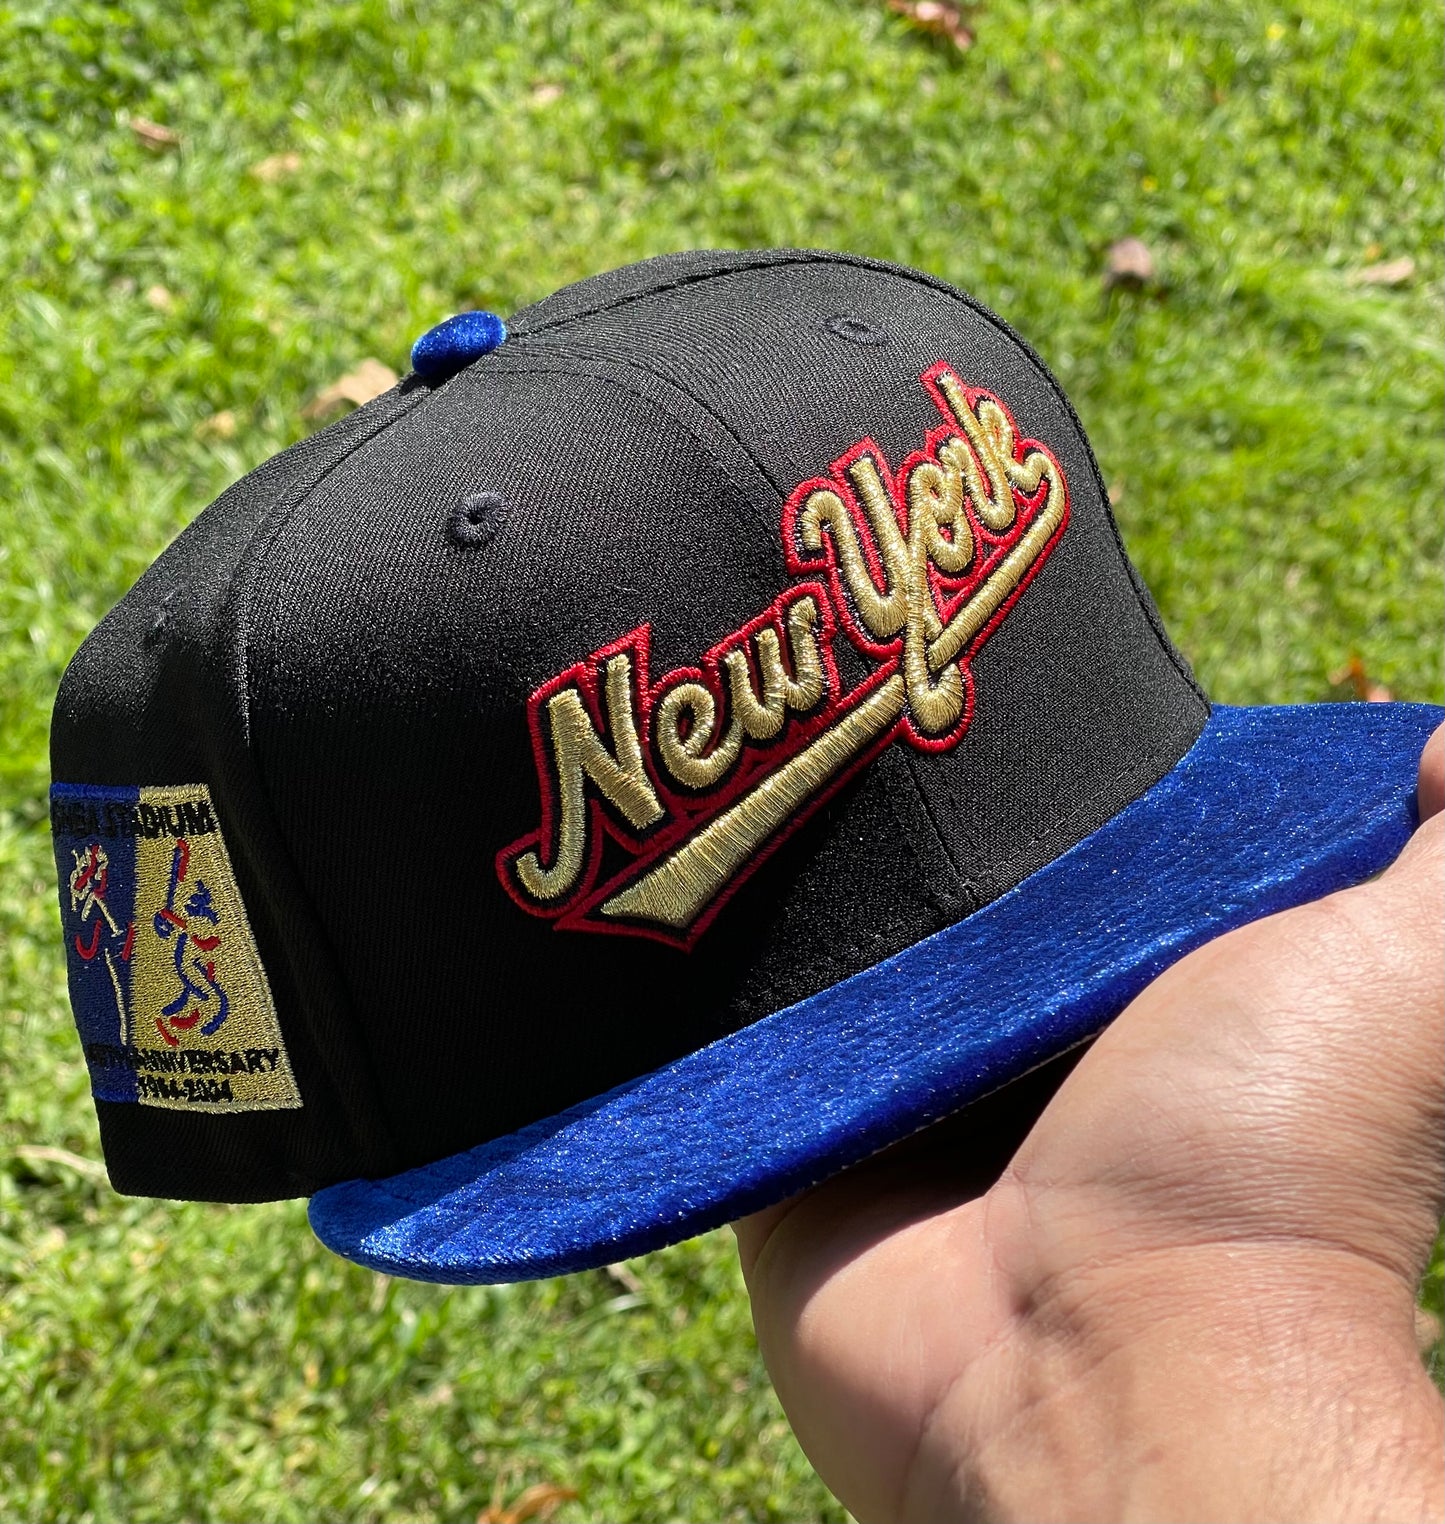 New York Mets Shea Stadium 40th Anniversary Fitted Hat (Black/Blue)